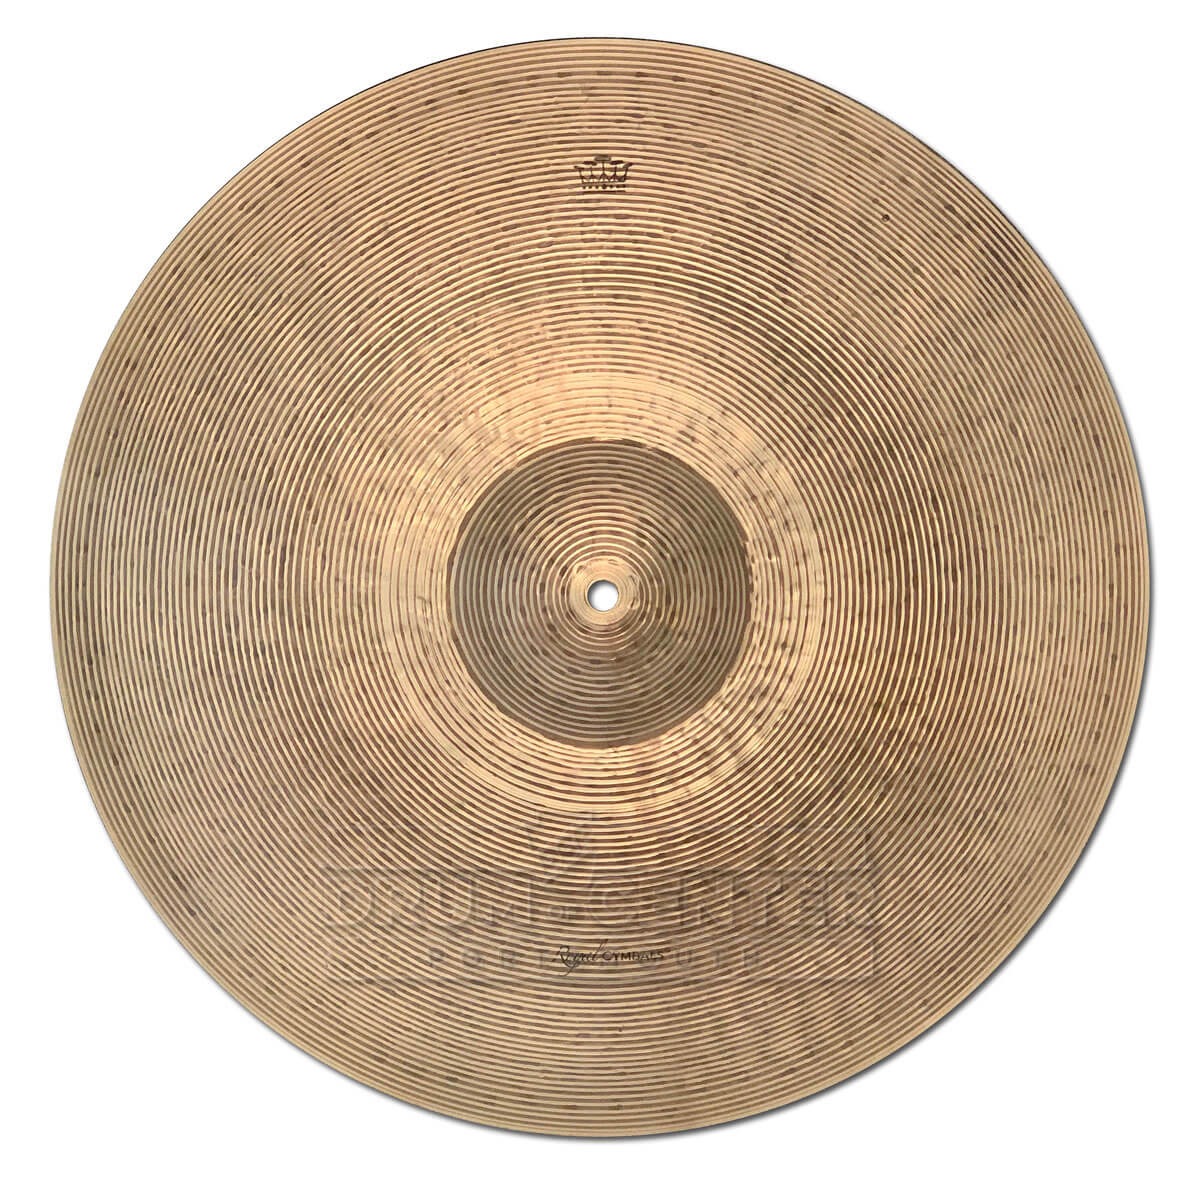 Royal Cymbals Royal Dry Crash Ride Cymbal 19" 1882 grams - Drum Center Of Portsmouth